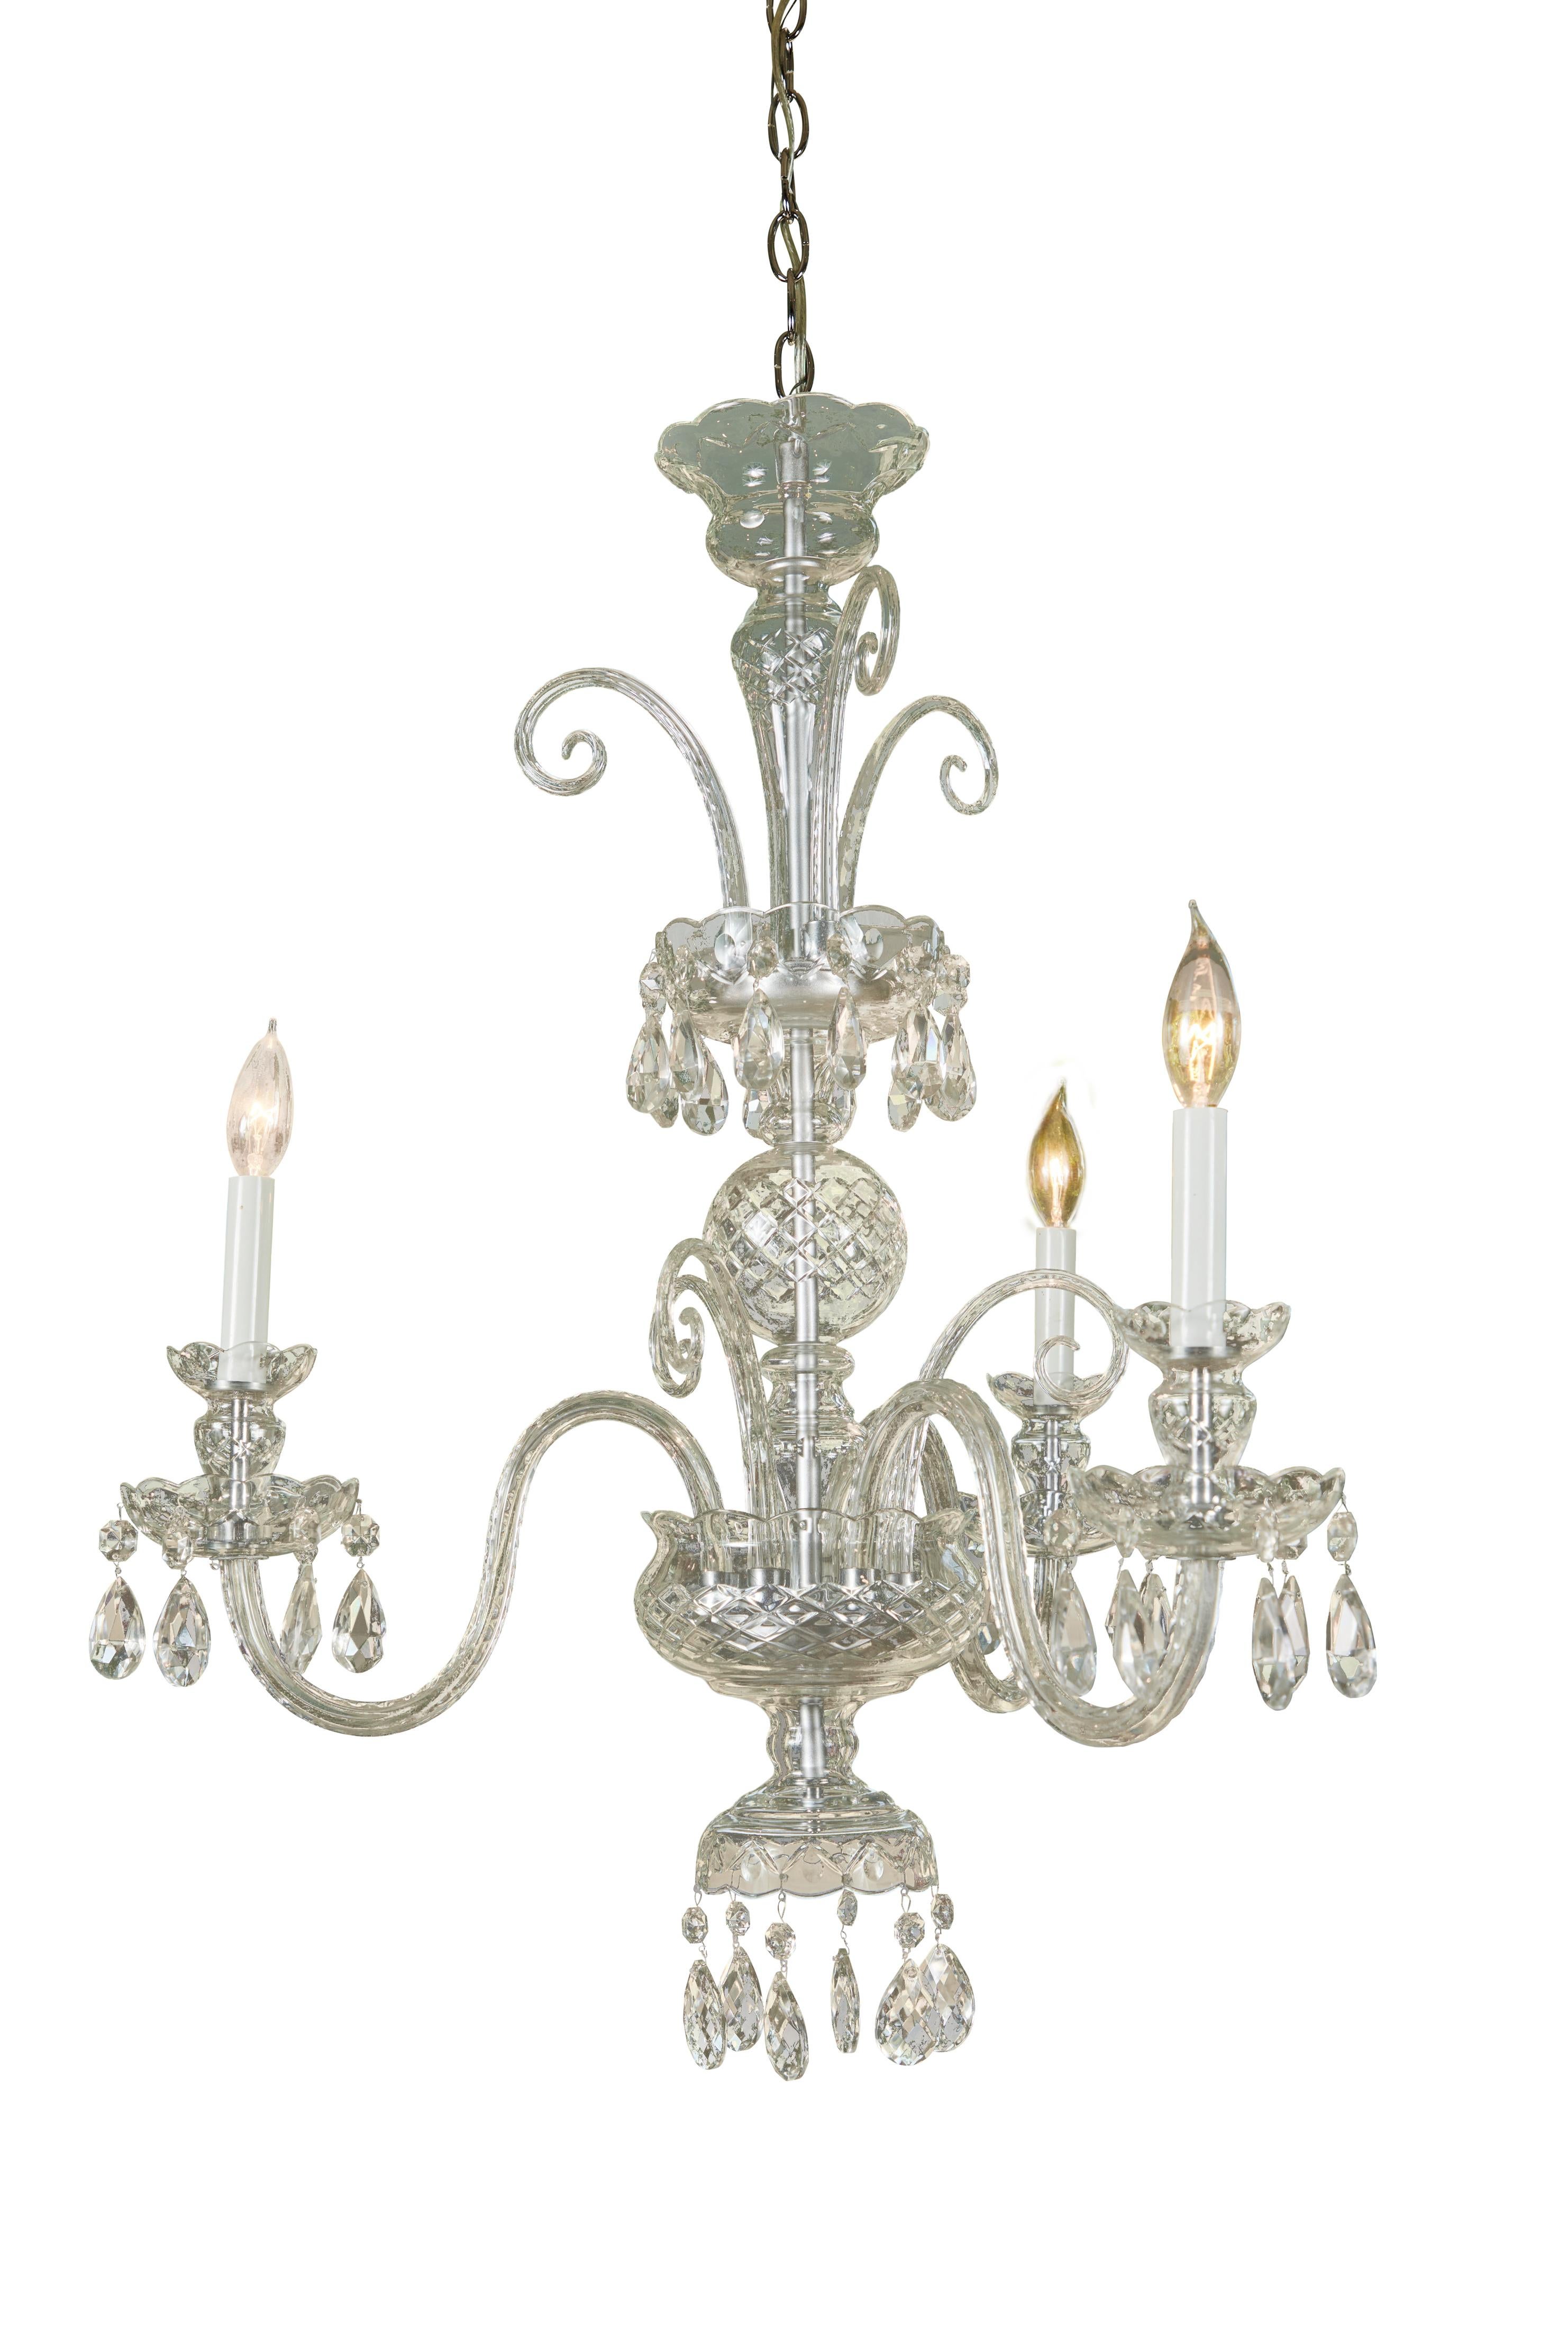 c. 1920 Czechoslovakian crystal 3-arm chandelier with hand blown crystal curled details. Newly wired.

Measures: Approx. 26